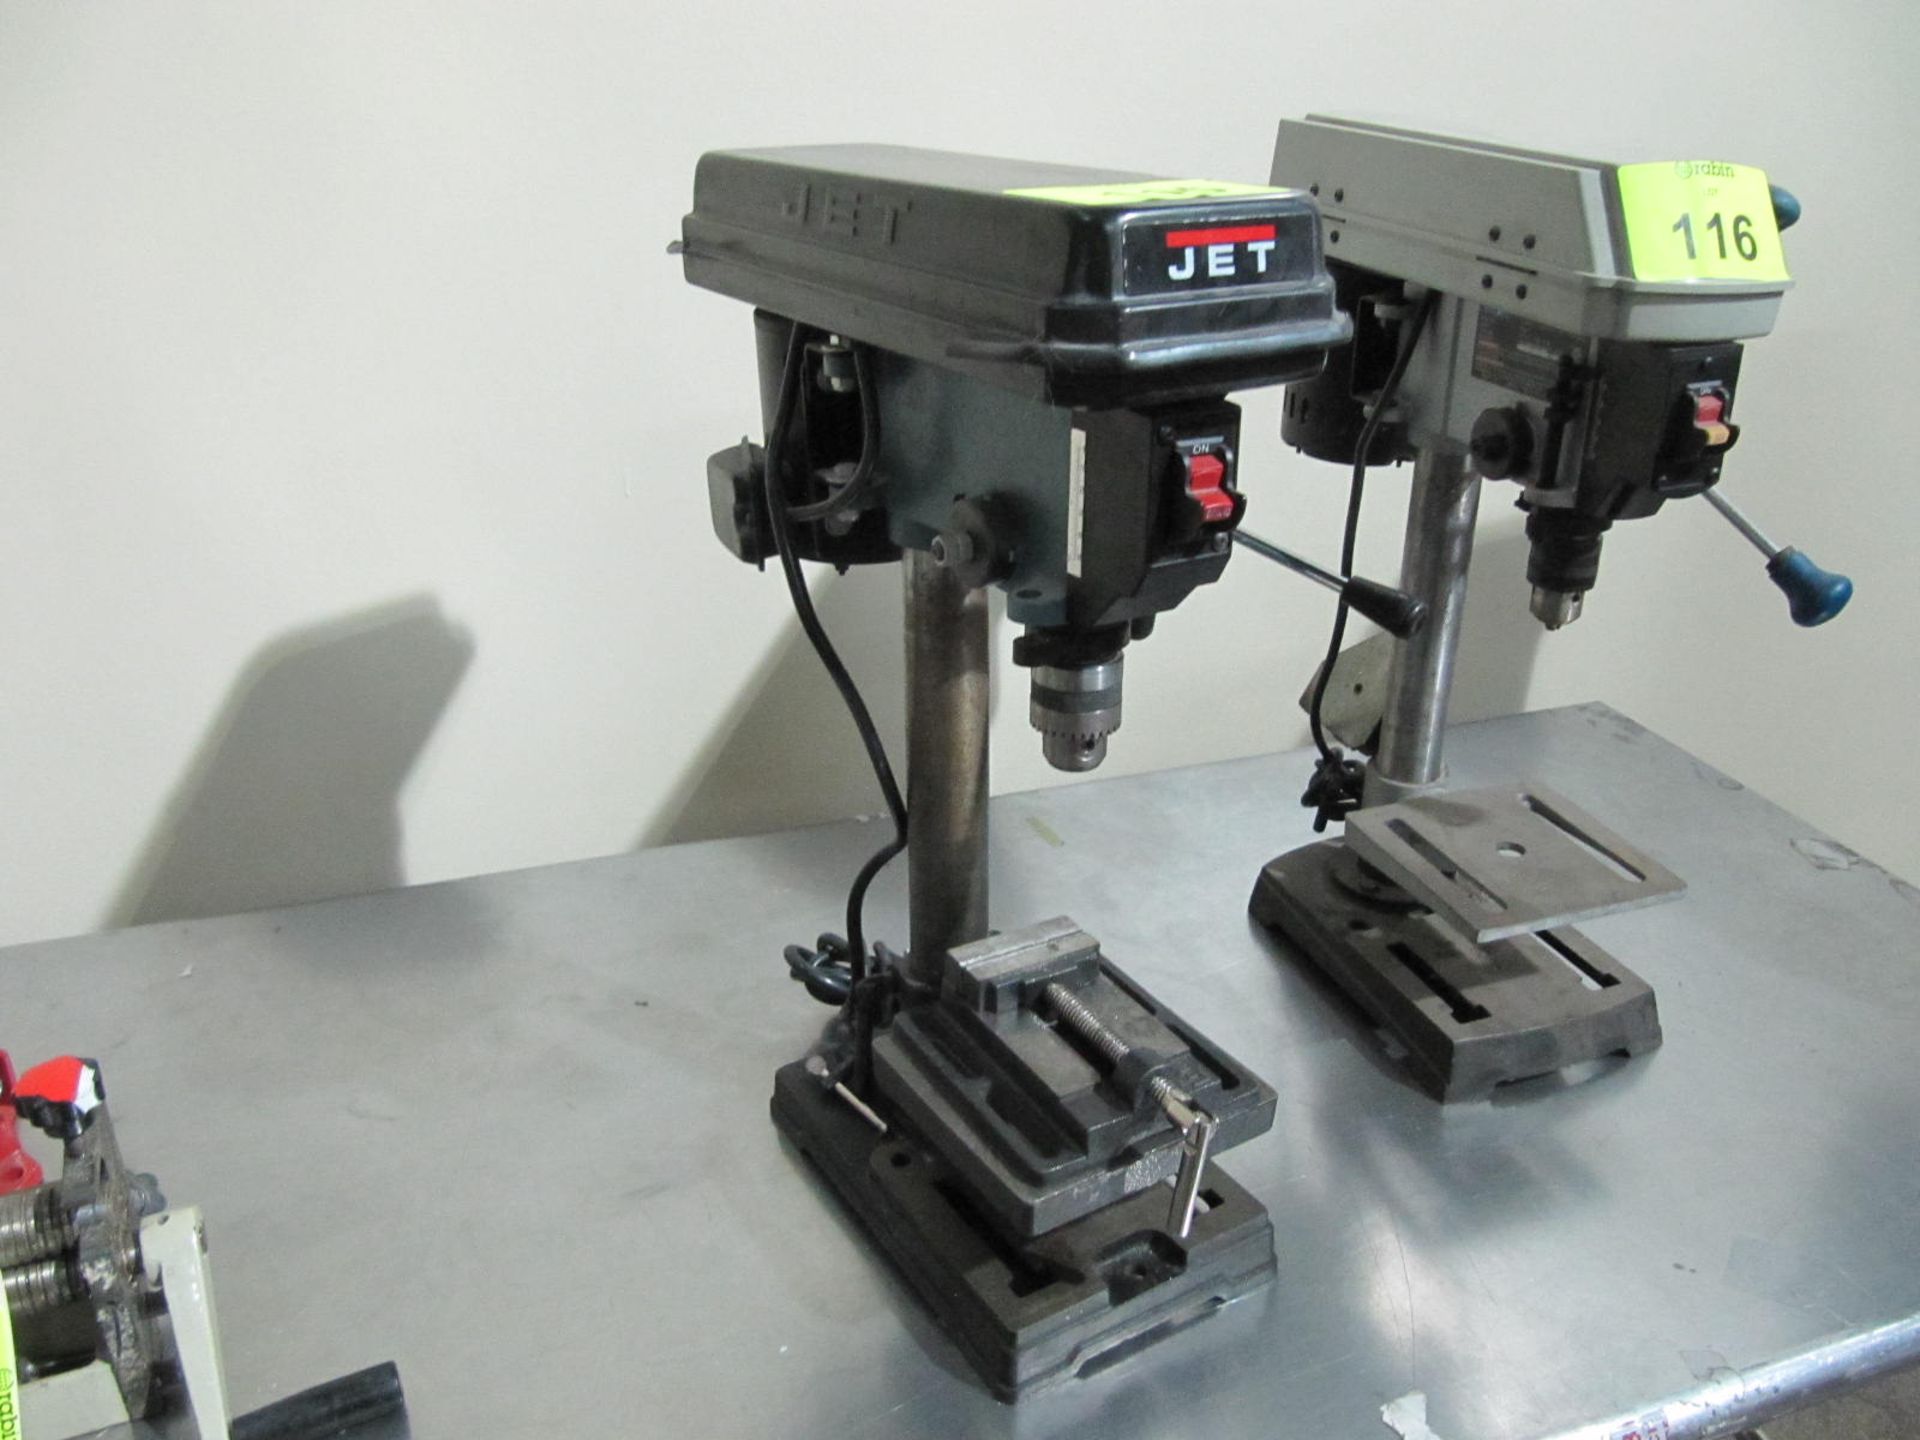 Jet drill press, model JPD-8, s/n 6090169, bench top with 3" machinist vise